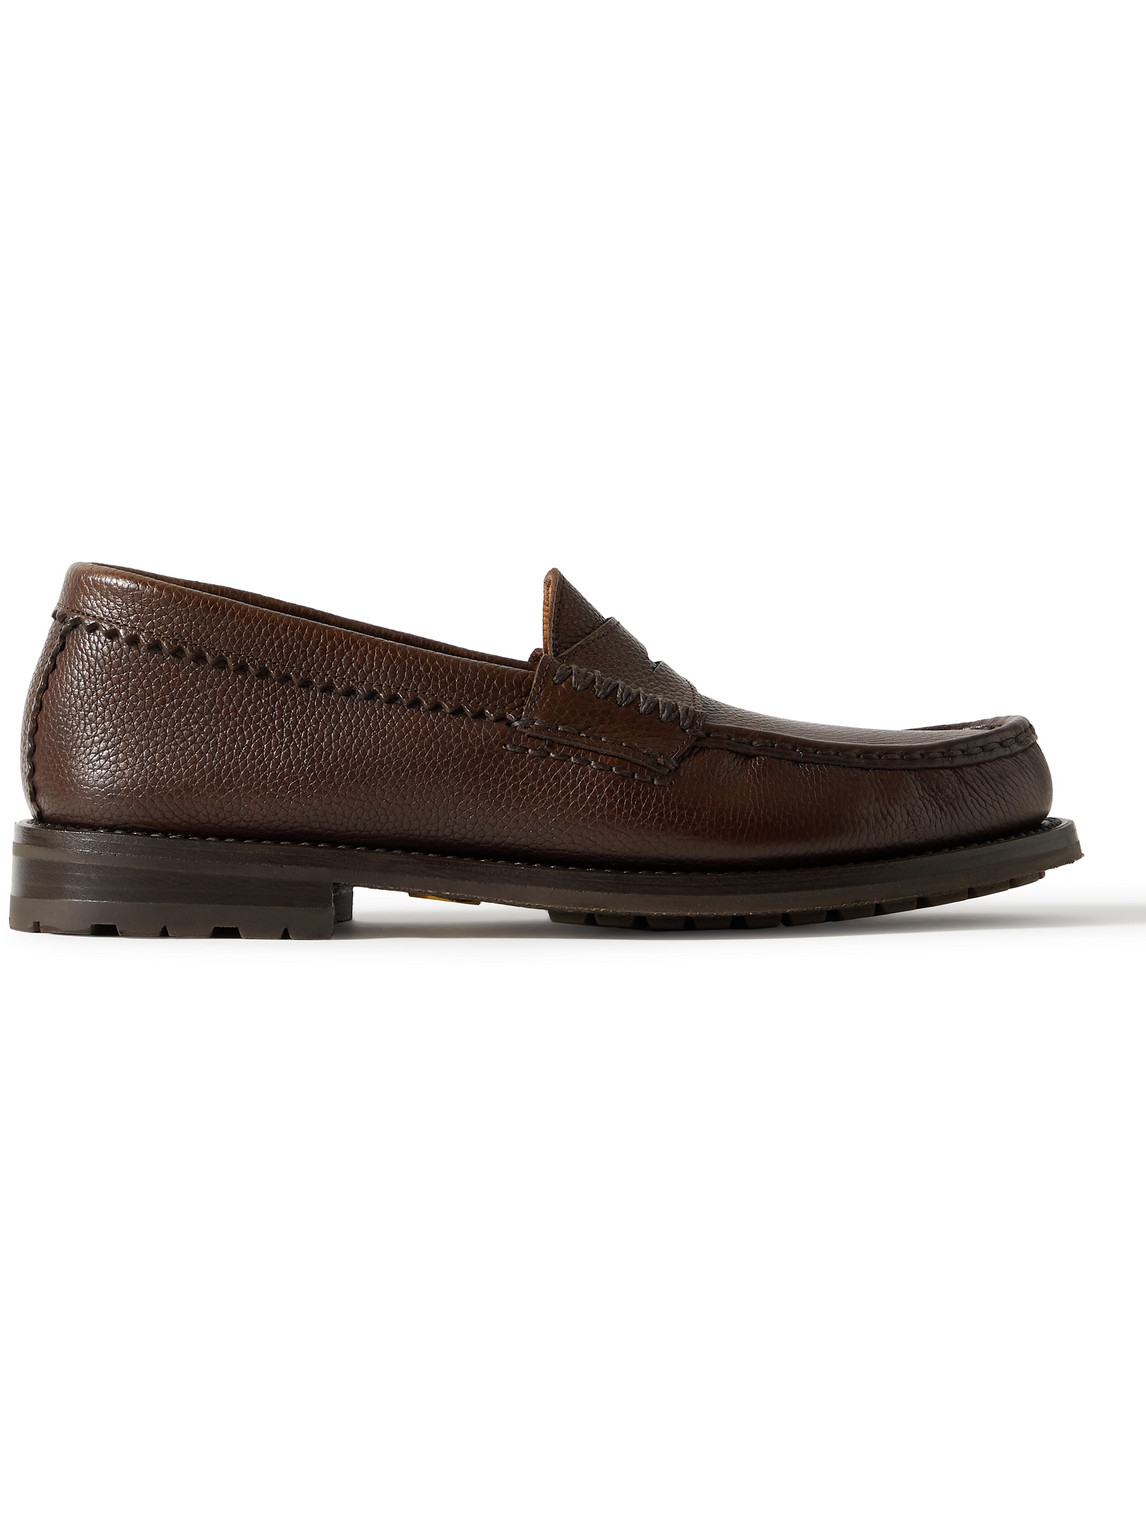 Yuketen Rob's Full-grain Leather Penny Loafers In Brown